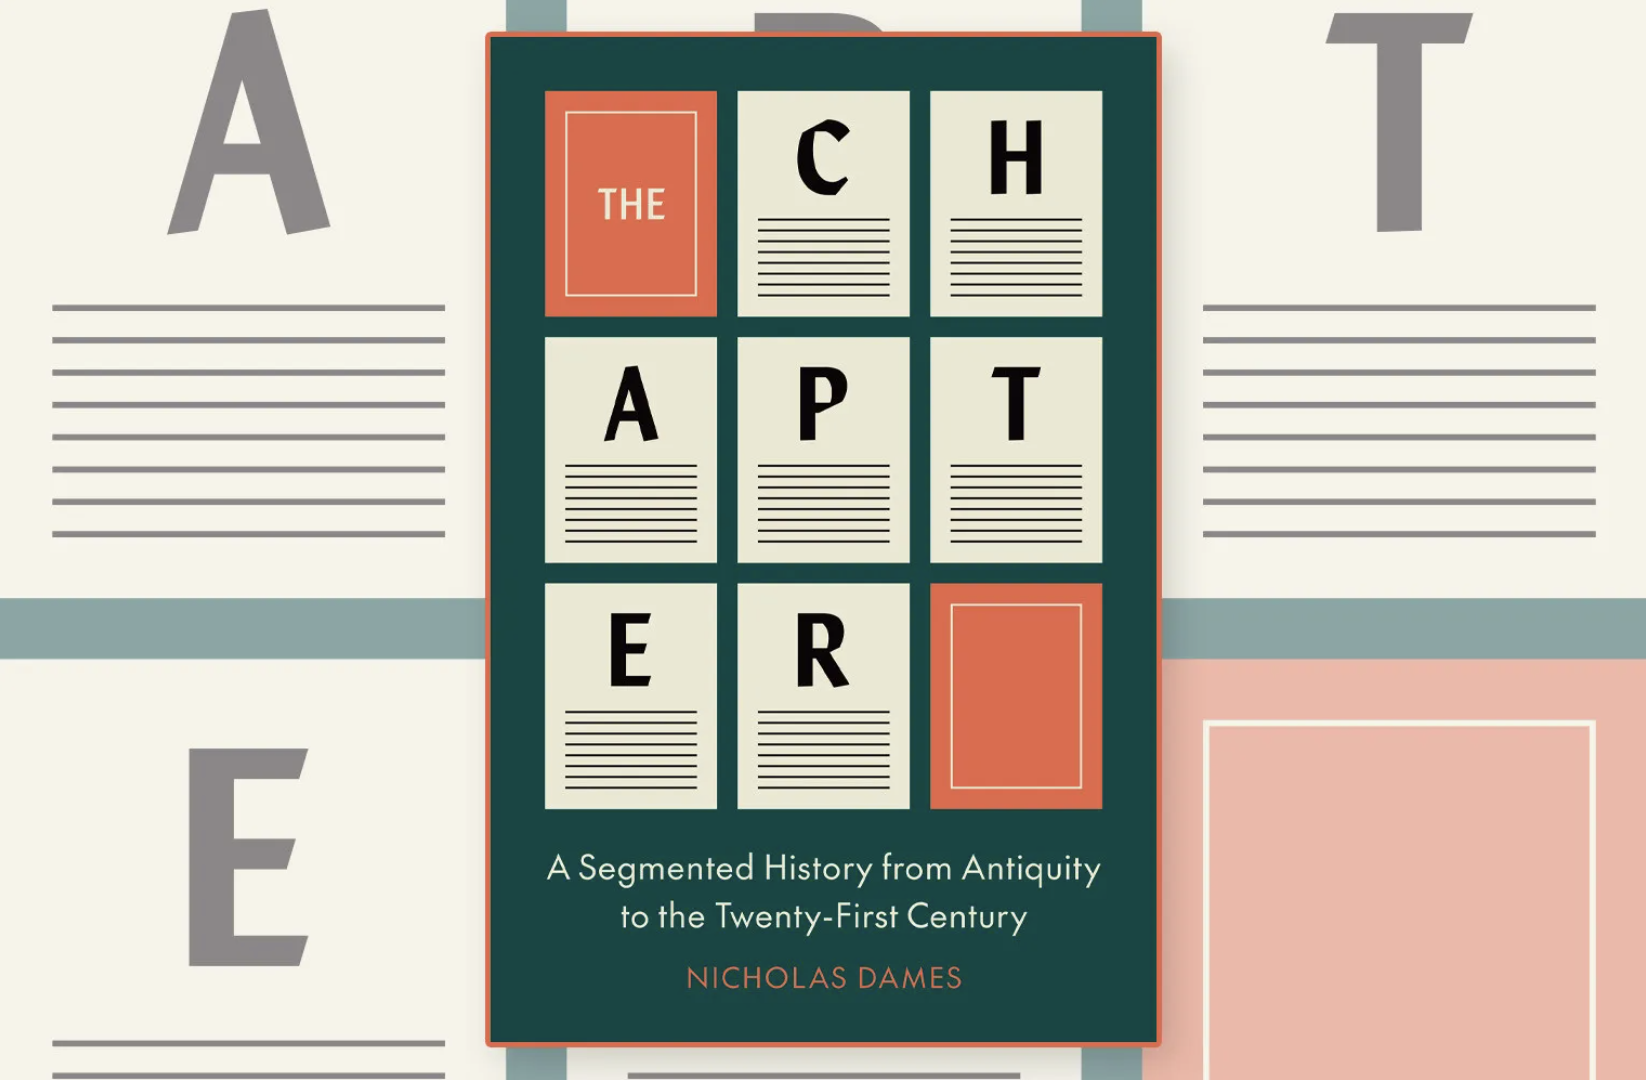 The Chapter: A Segmented History from Antiquity to the Twenty-First Century